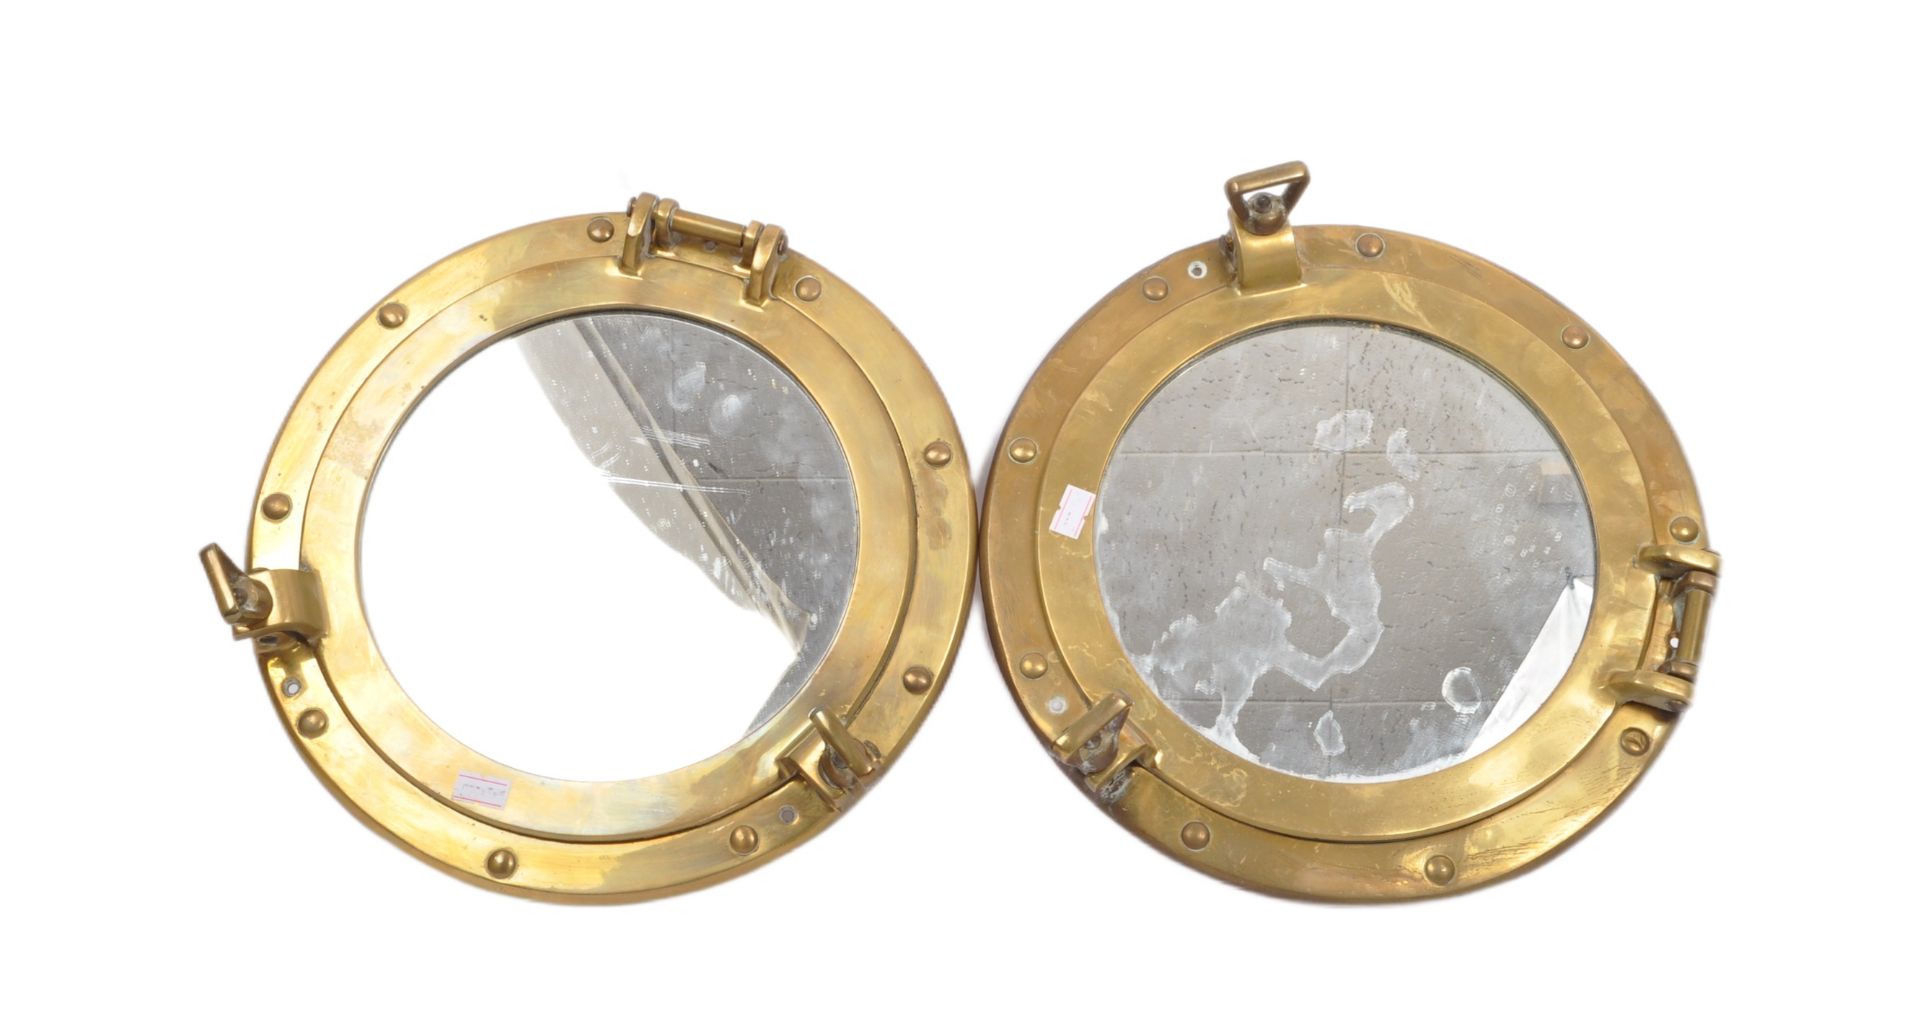 PAIR OF 20TH CENTURY SOLID BRASS SHIPS PORTHOLE MIRRORS